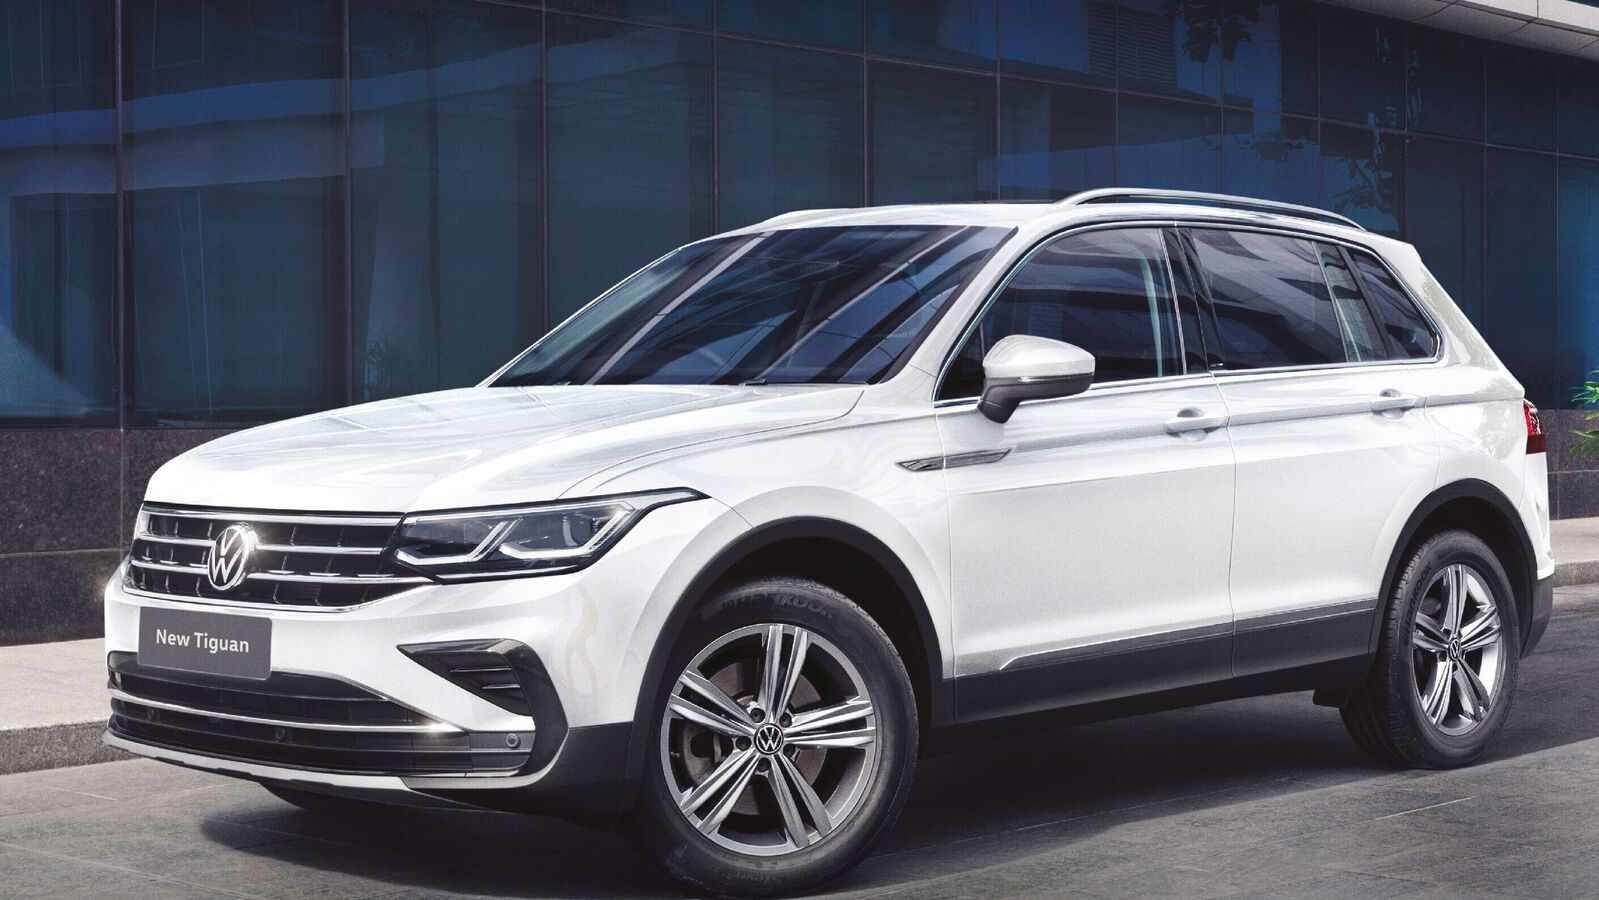 Volkswagen Tiguan Exclusive Edition launched in India, priced at ₹33.50  lakh | HT Auto